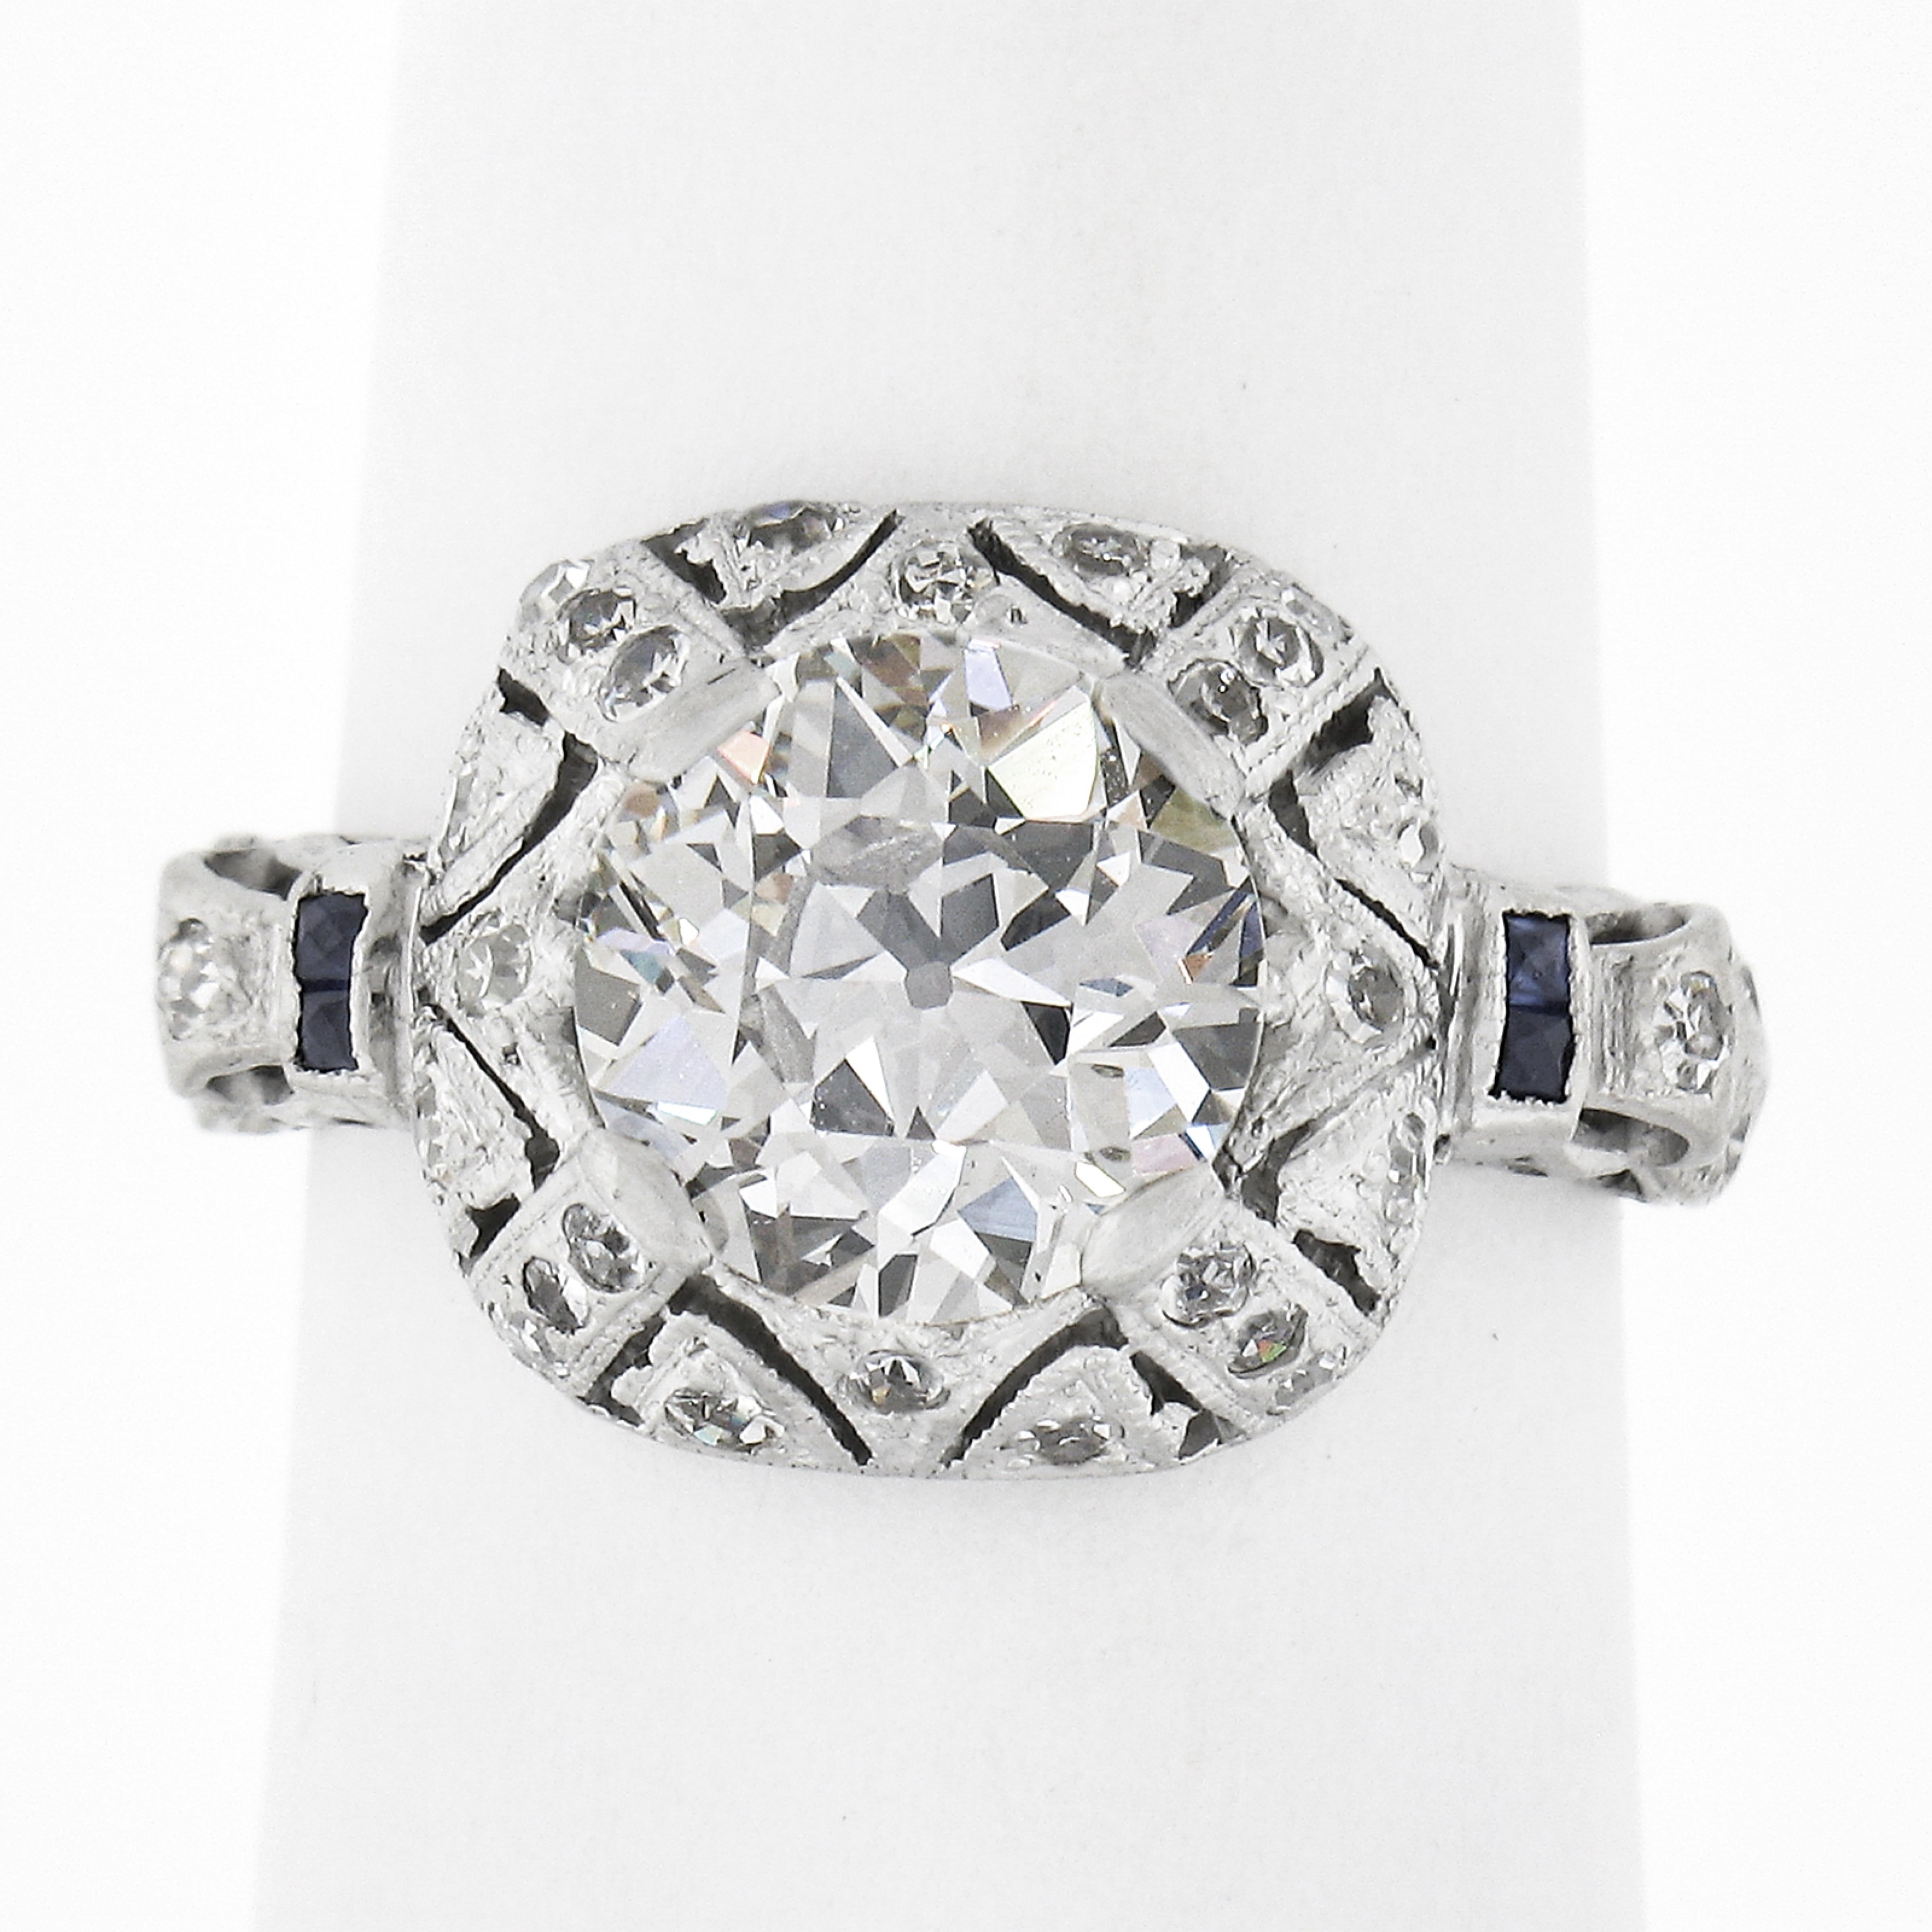 This fancy and uniquely designed antique engagement ring is from the early art deco period and crafted in solid platinum. It features a gorgeous, large GIA certified old European cut diamond neatly set at the center of the puffed cushion shaped